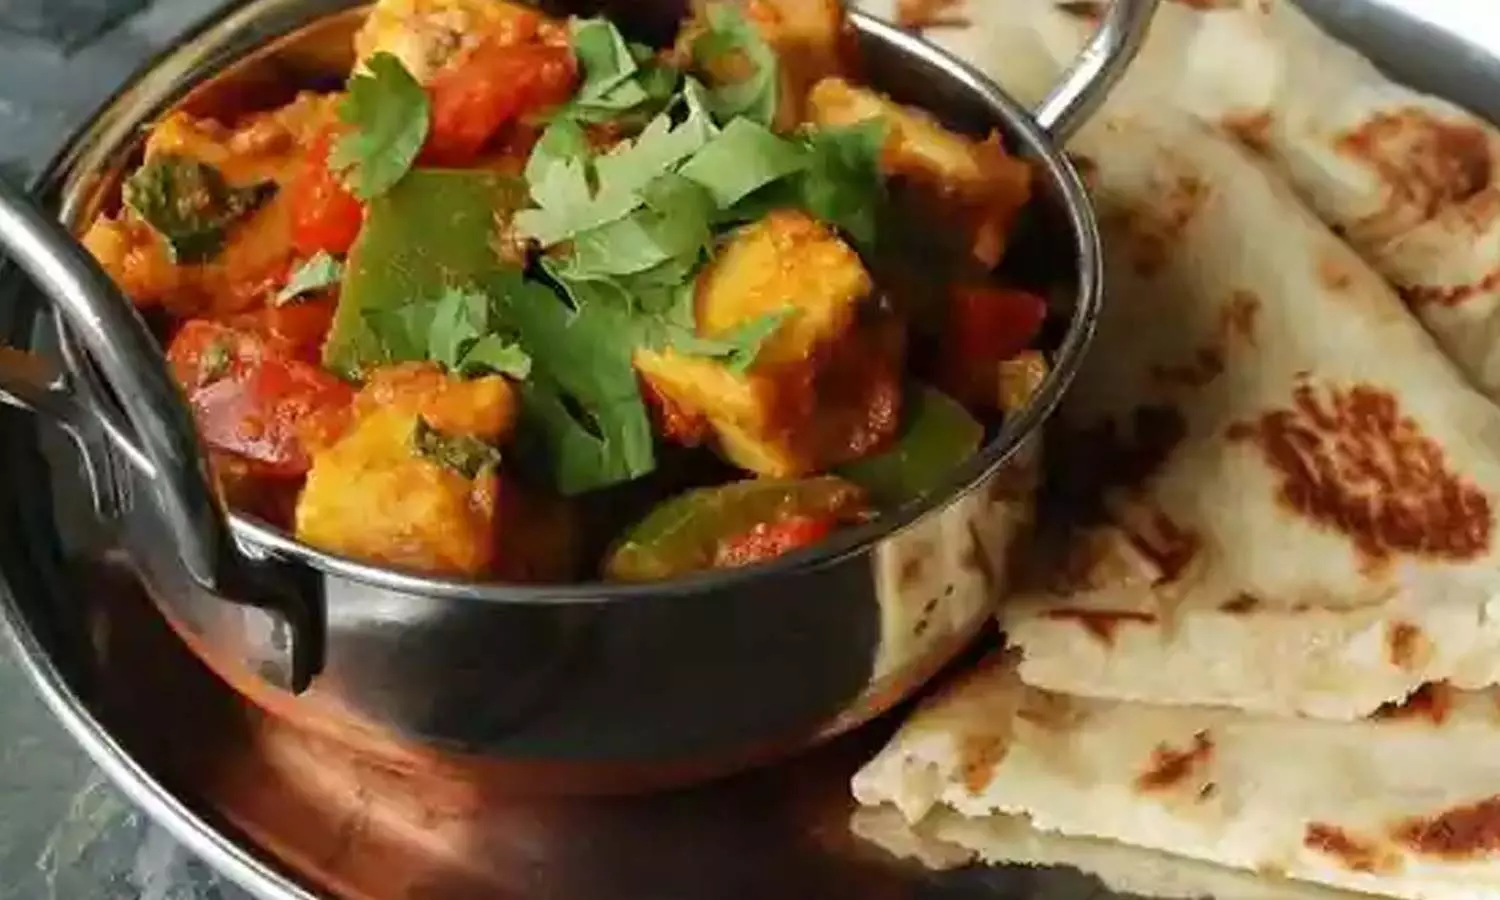 TasteAtlast worlds best dishes of 2022: Only Shahi Paneer from India made it under the top 50 ranking at the 28th spot